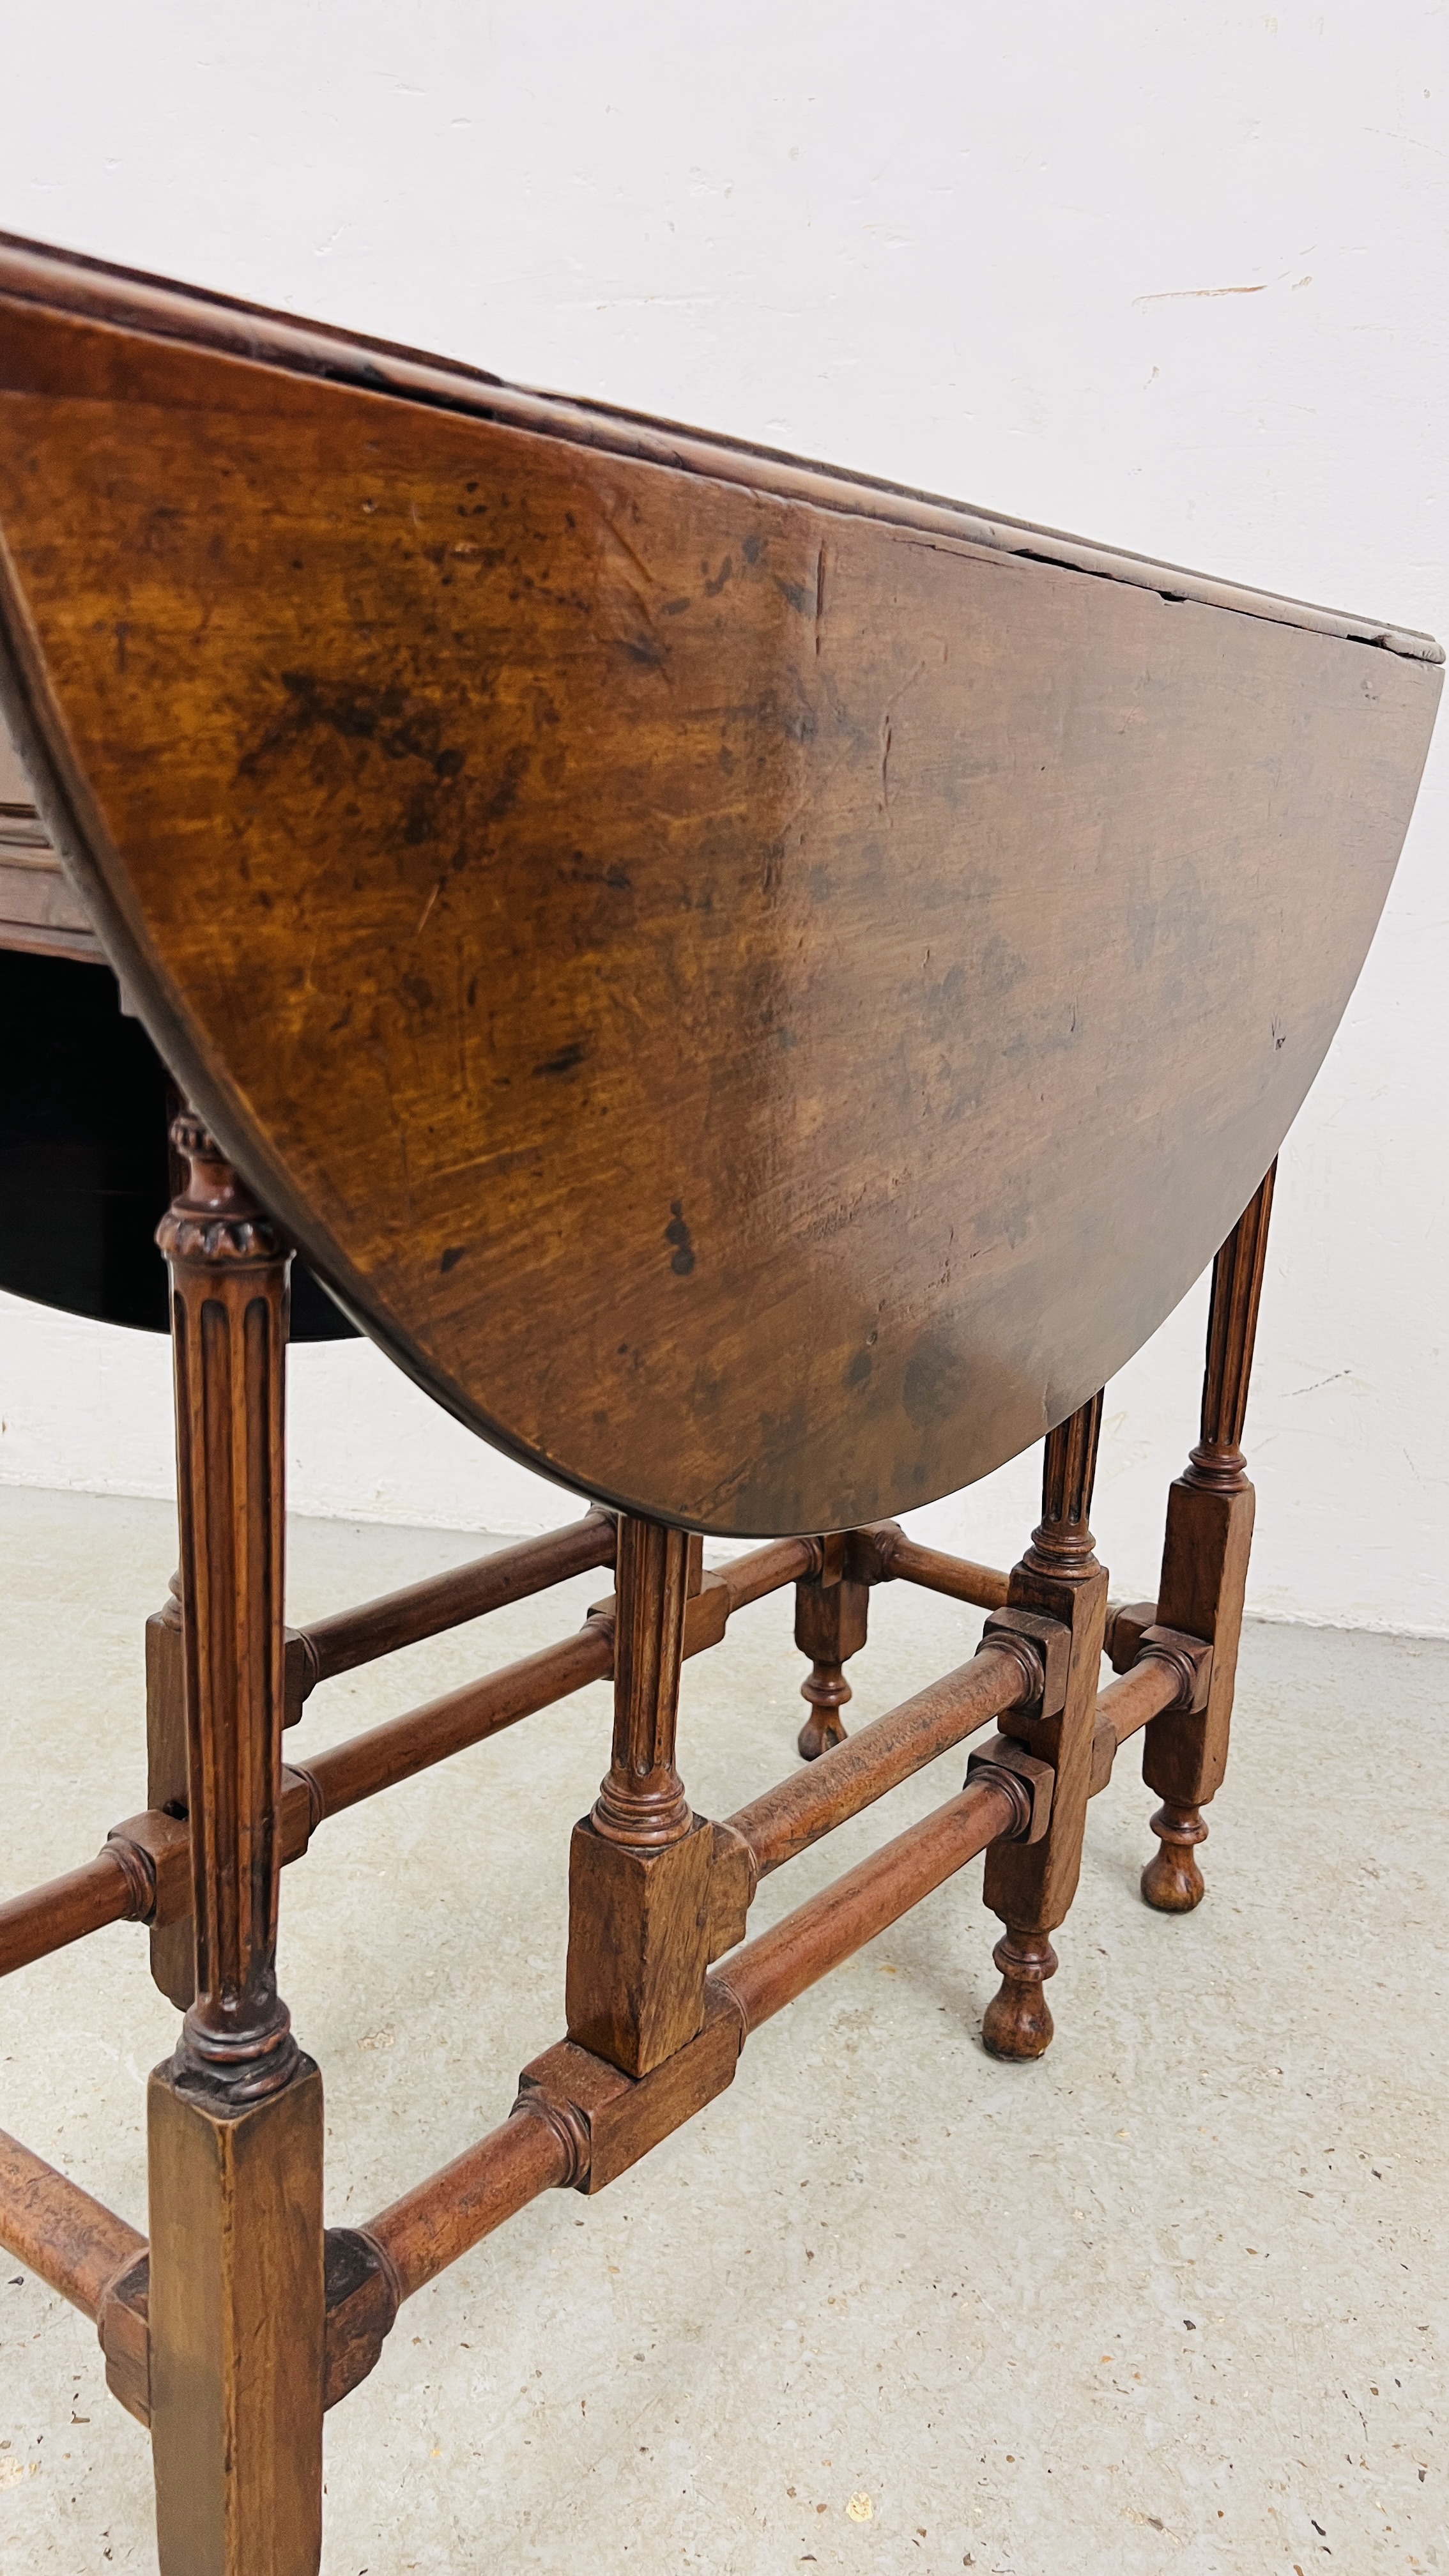 A MAHOGANY GATELEG TABLE, C18TH. AND LATER, EXTENDED 100CM. - Image 6 of 18